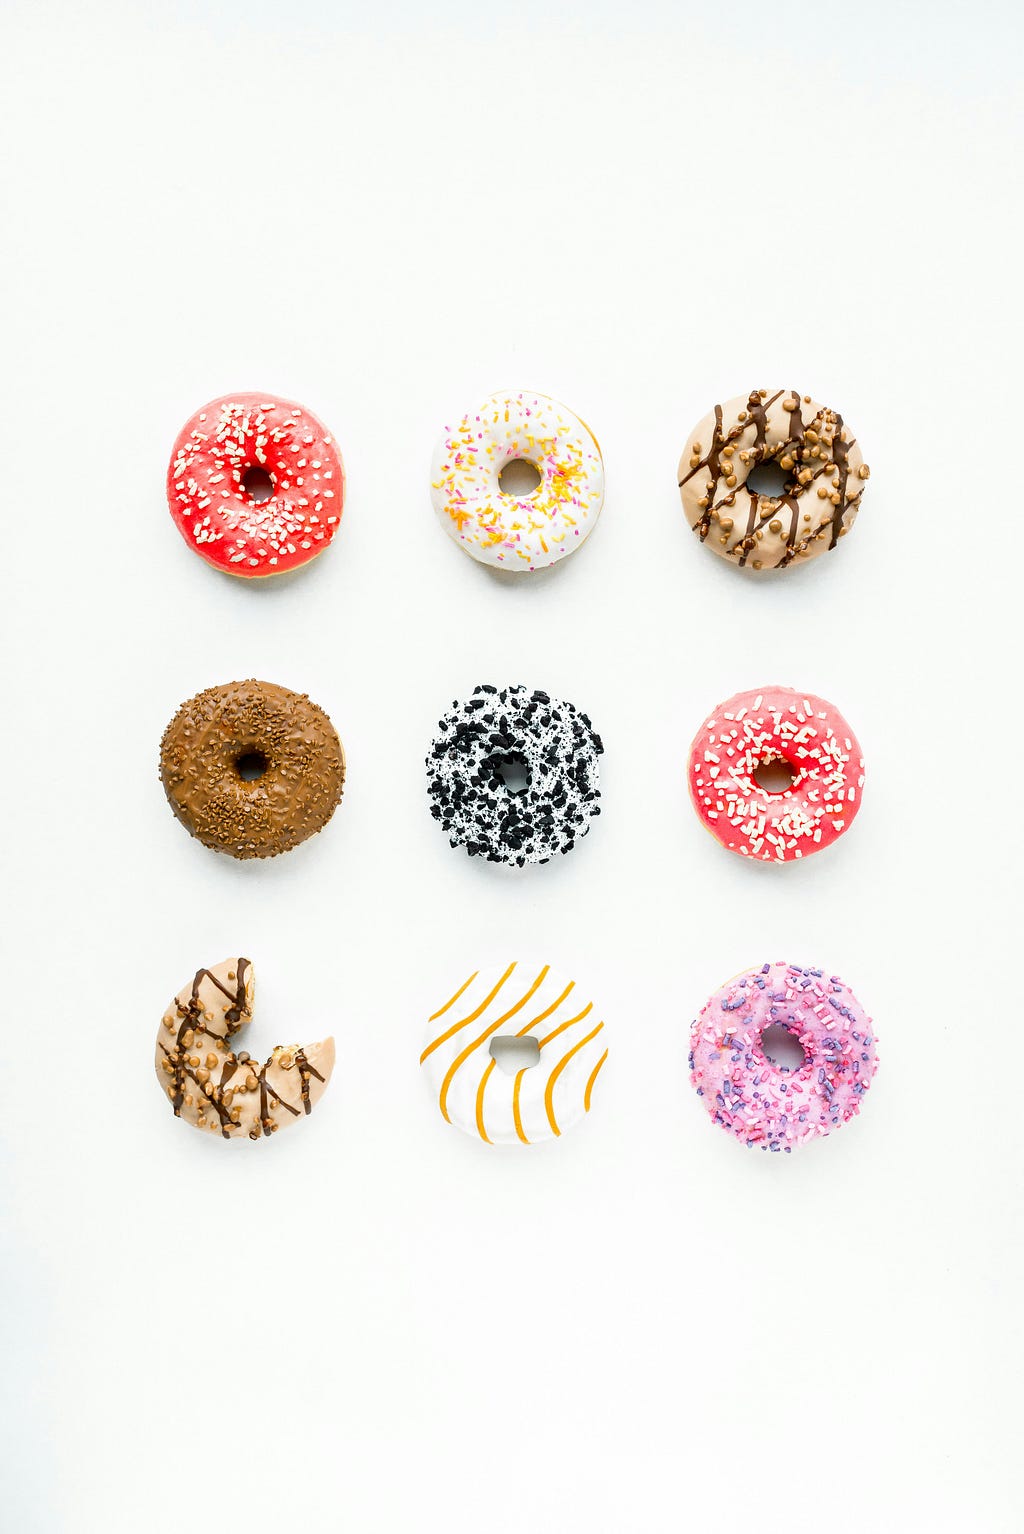 A photo of donuts